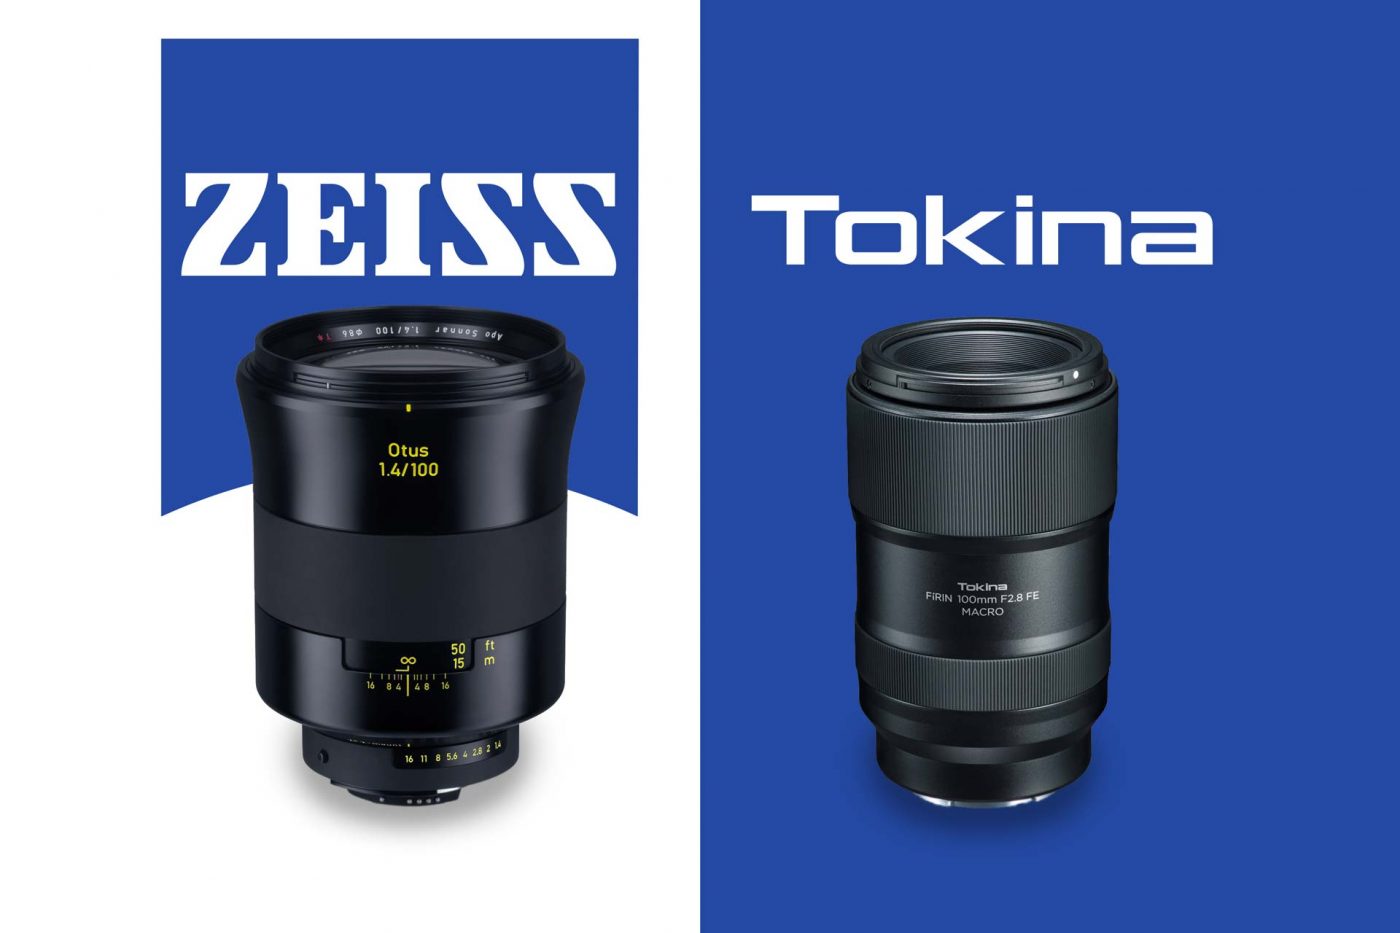 Zeiss and Tokina 100mm lenses announced